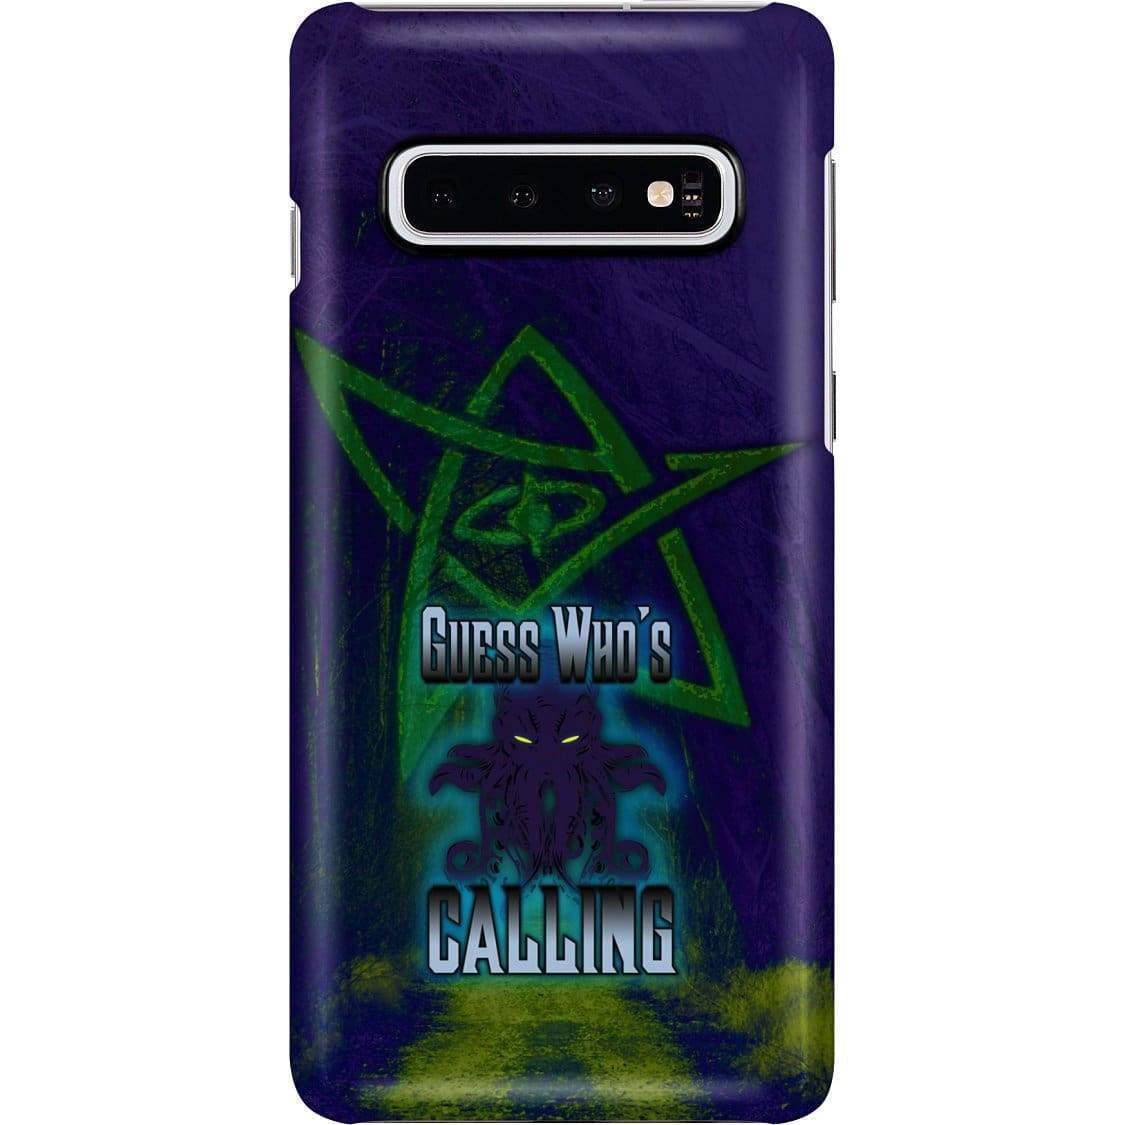 Cthulhu - Guess Who’s Calling Phone Case - Snap * iPhone * Samsung * - Samsung Galaxy S10 Case / Gloss / Apparel